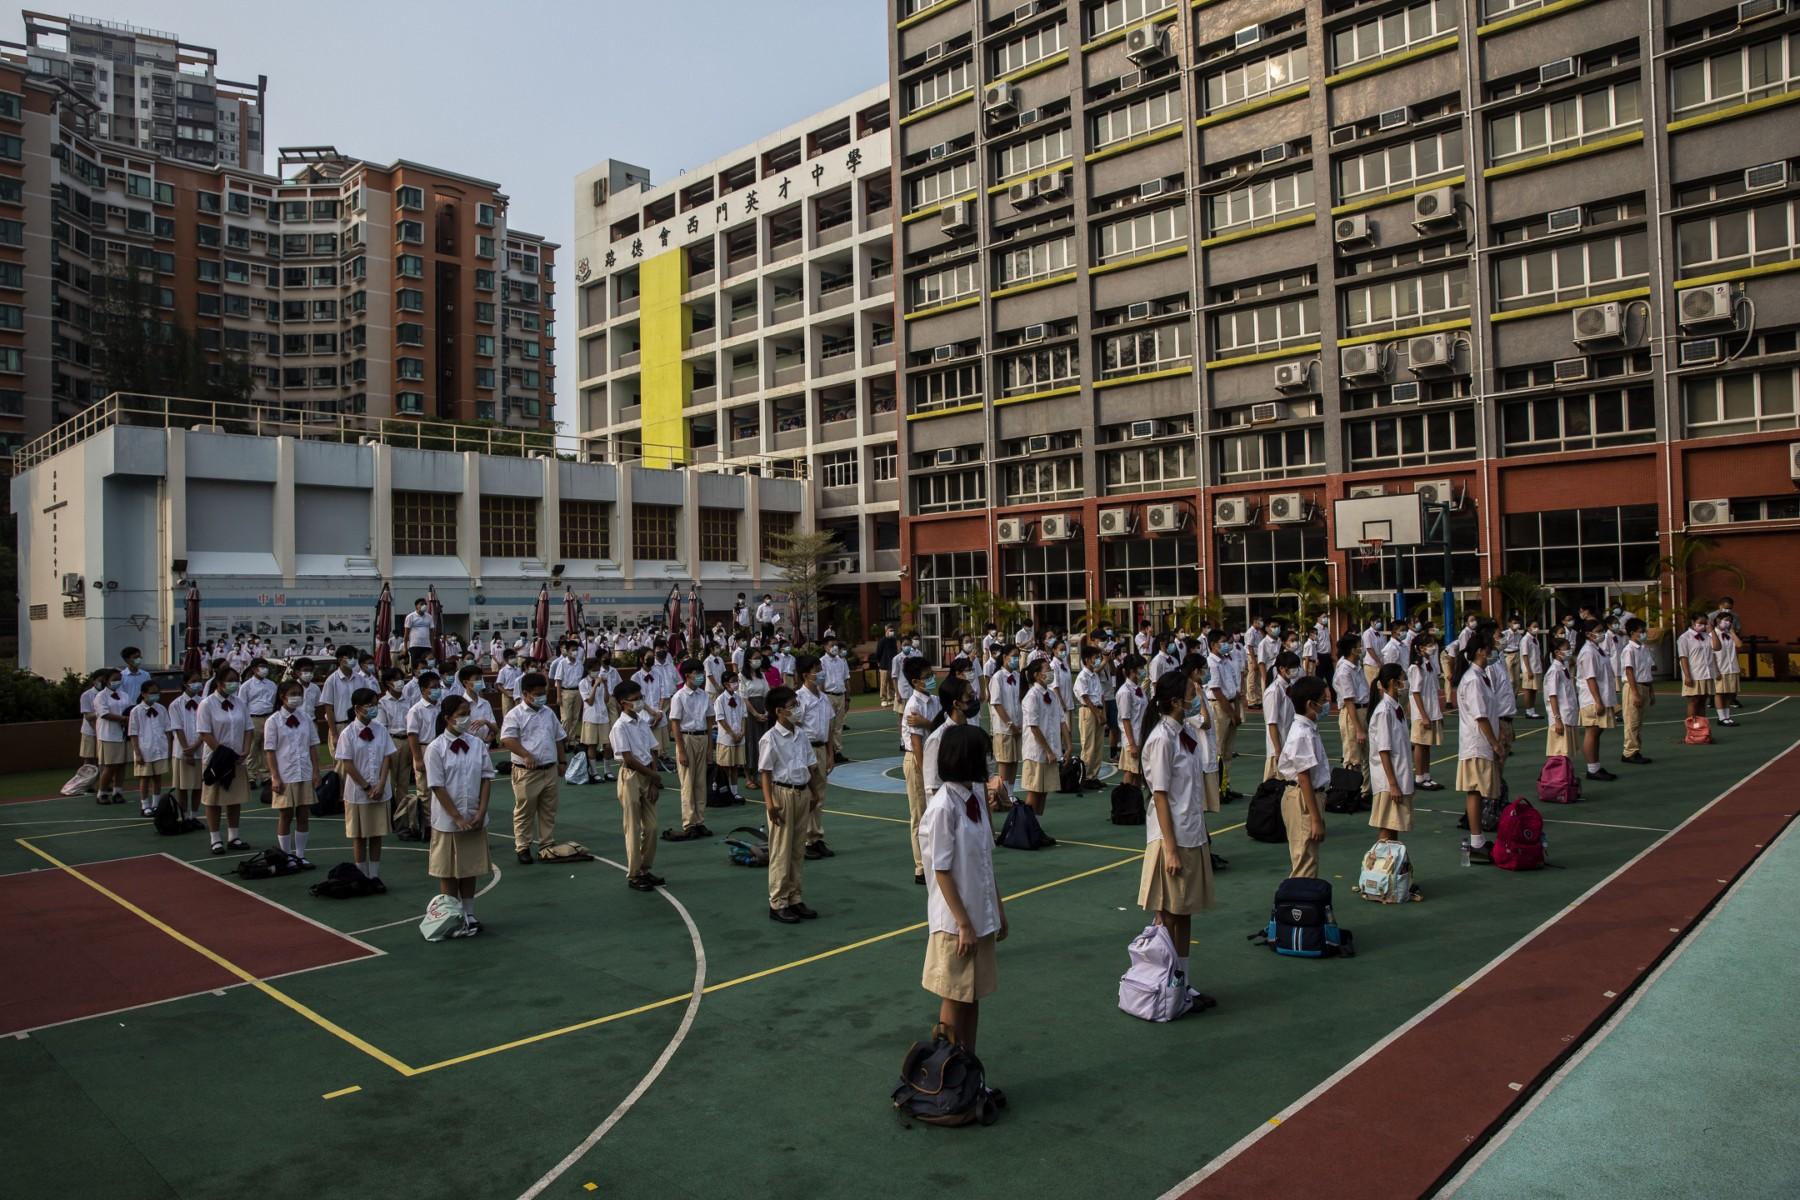 Student watch a flag raising ceremony at a school in the Yuen Long district of Hong Kong on Sept 30, 2021. Photo: AFP